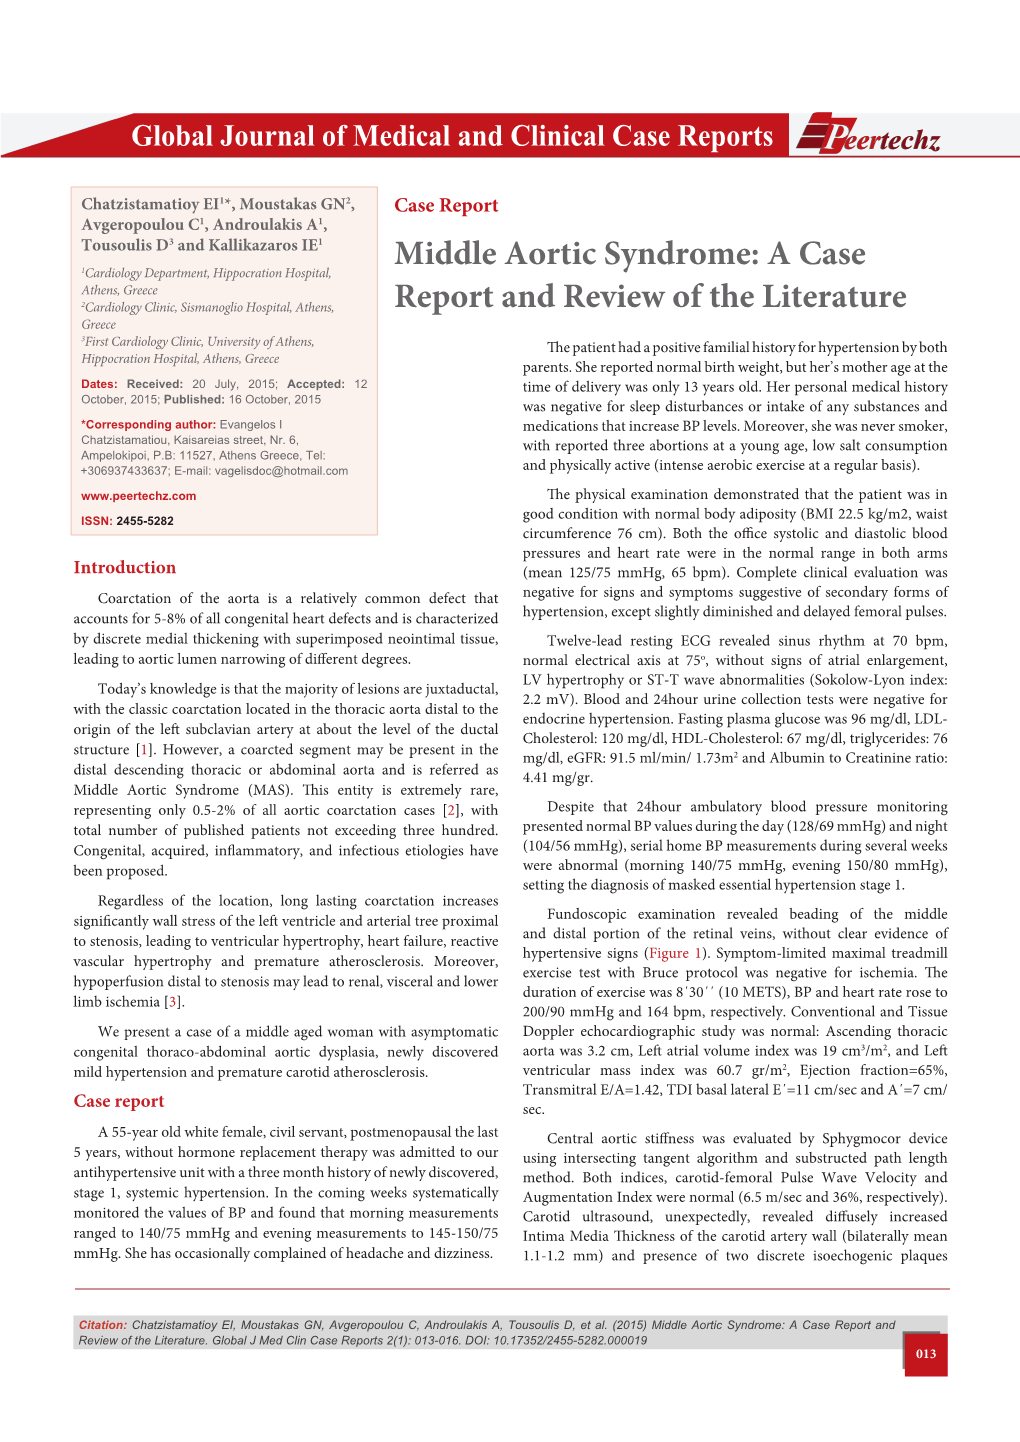 Middle Aortic Syndrome